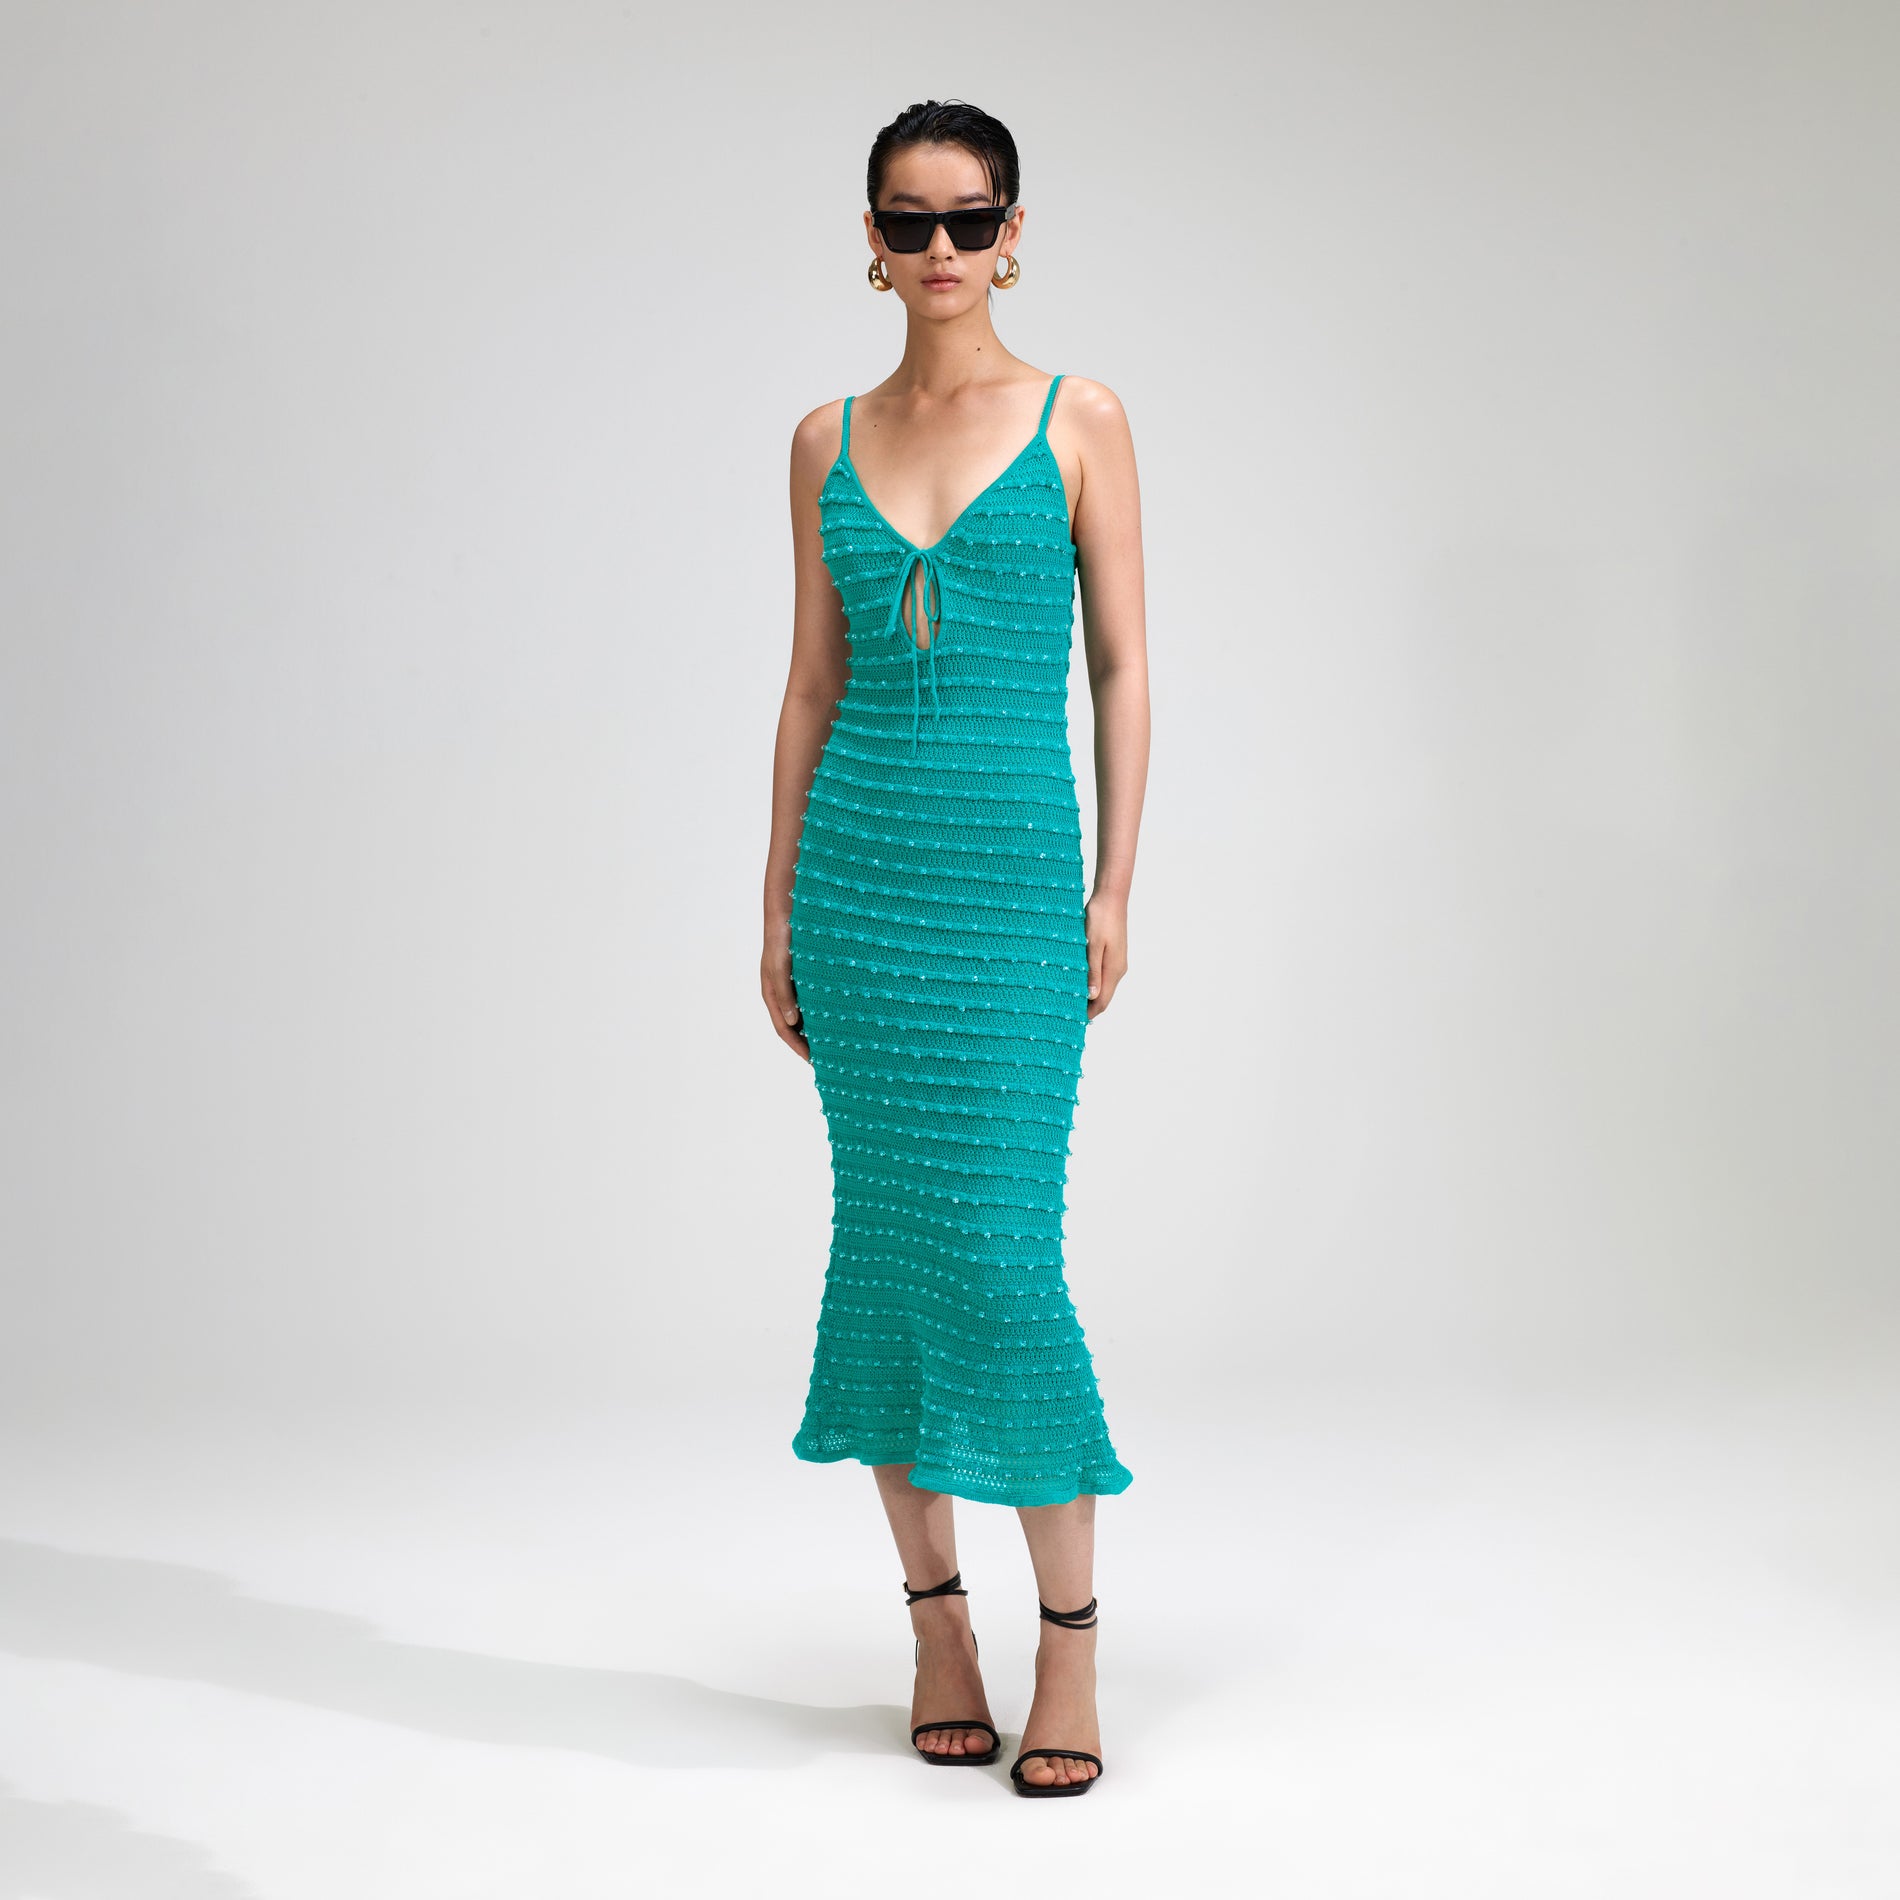 A woman wearing the Green Beaded Strappy Knit Midi Dress